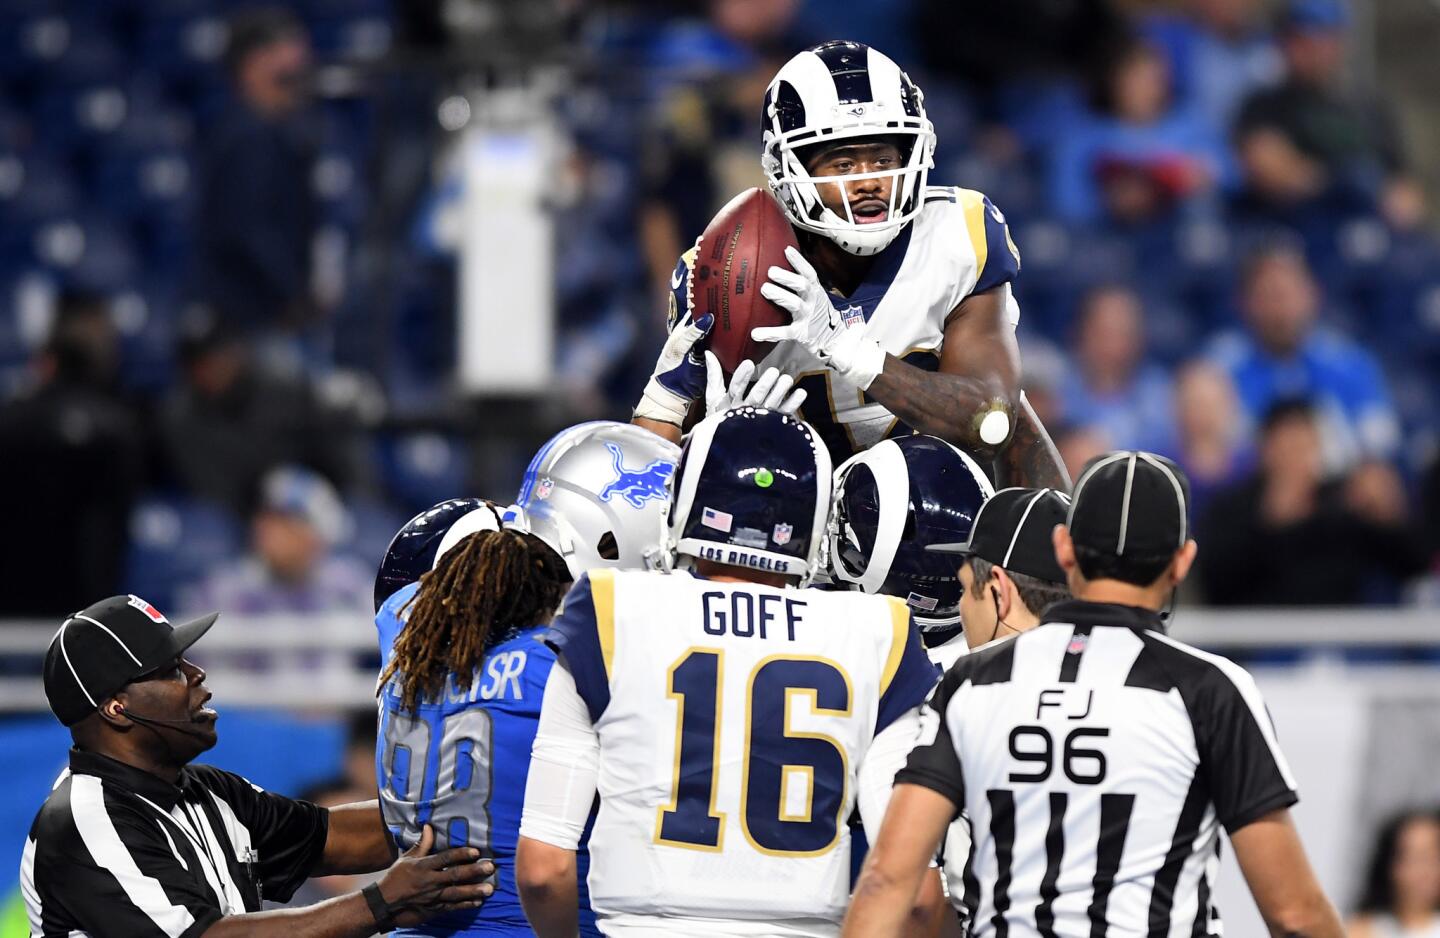 Rams receiver Brandin Cooks is given a football after Todd Gurley's touchdown against the Lions in the fourth quarter at Ford Field in Detroit on Sunday.